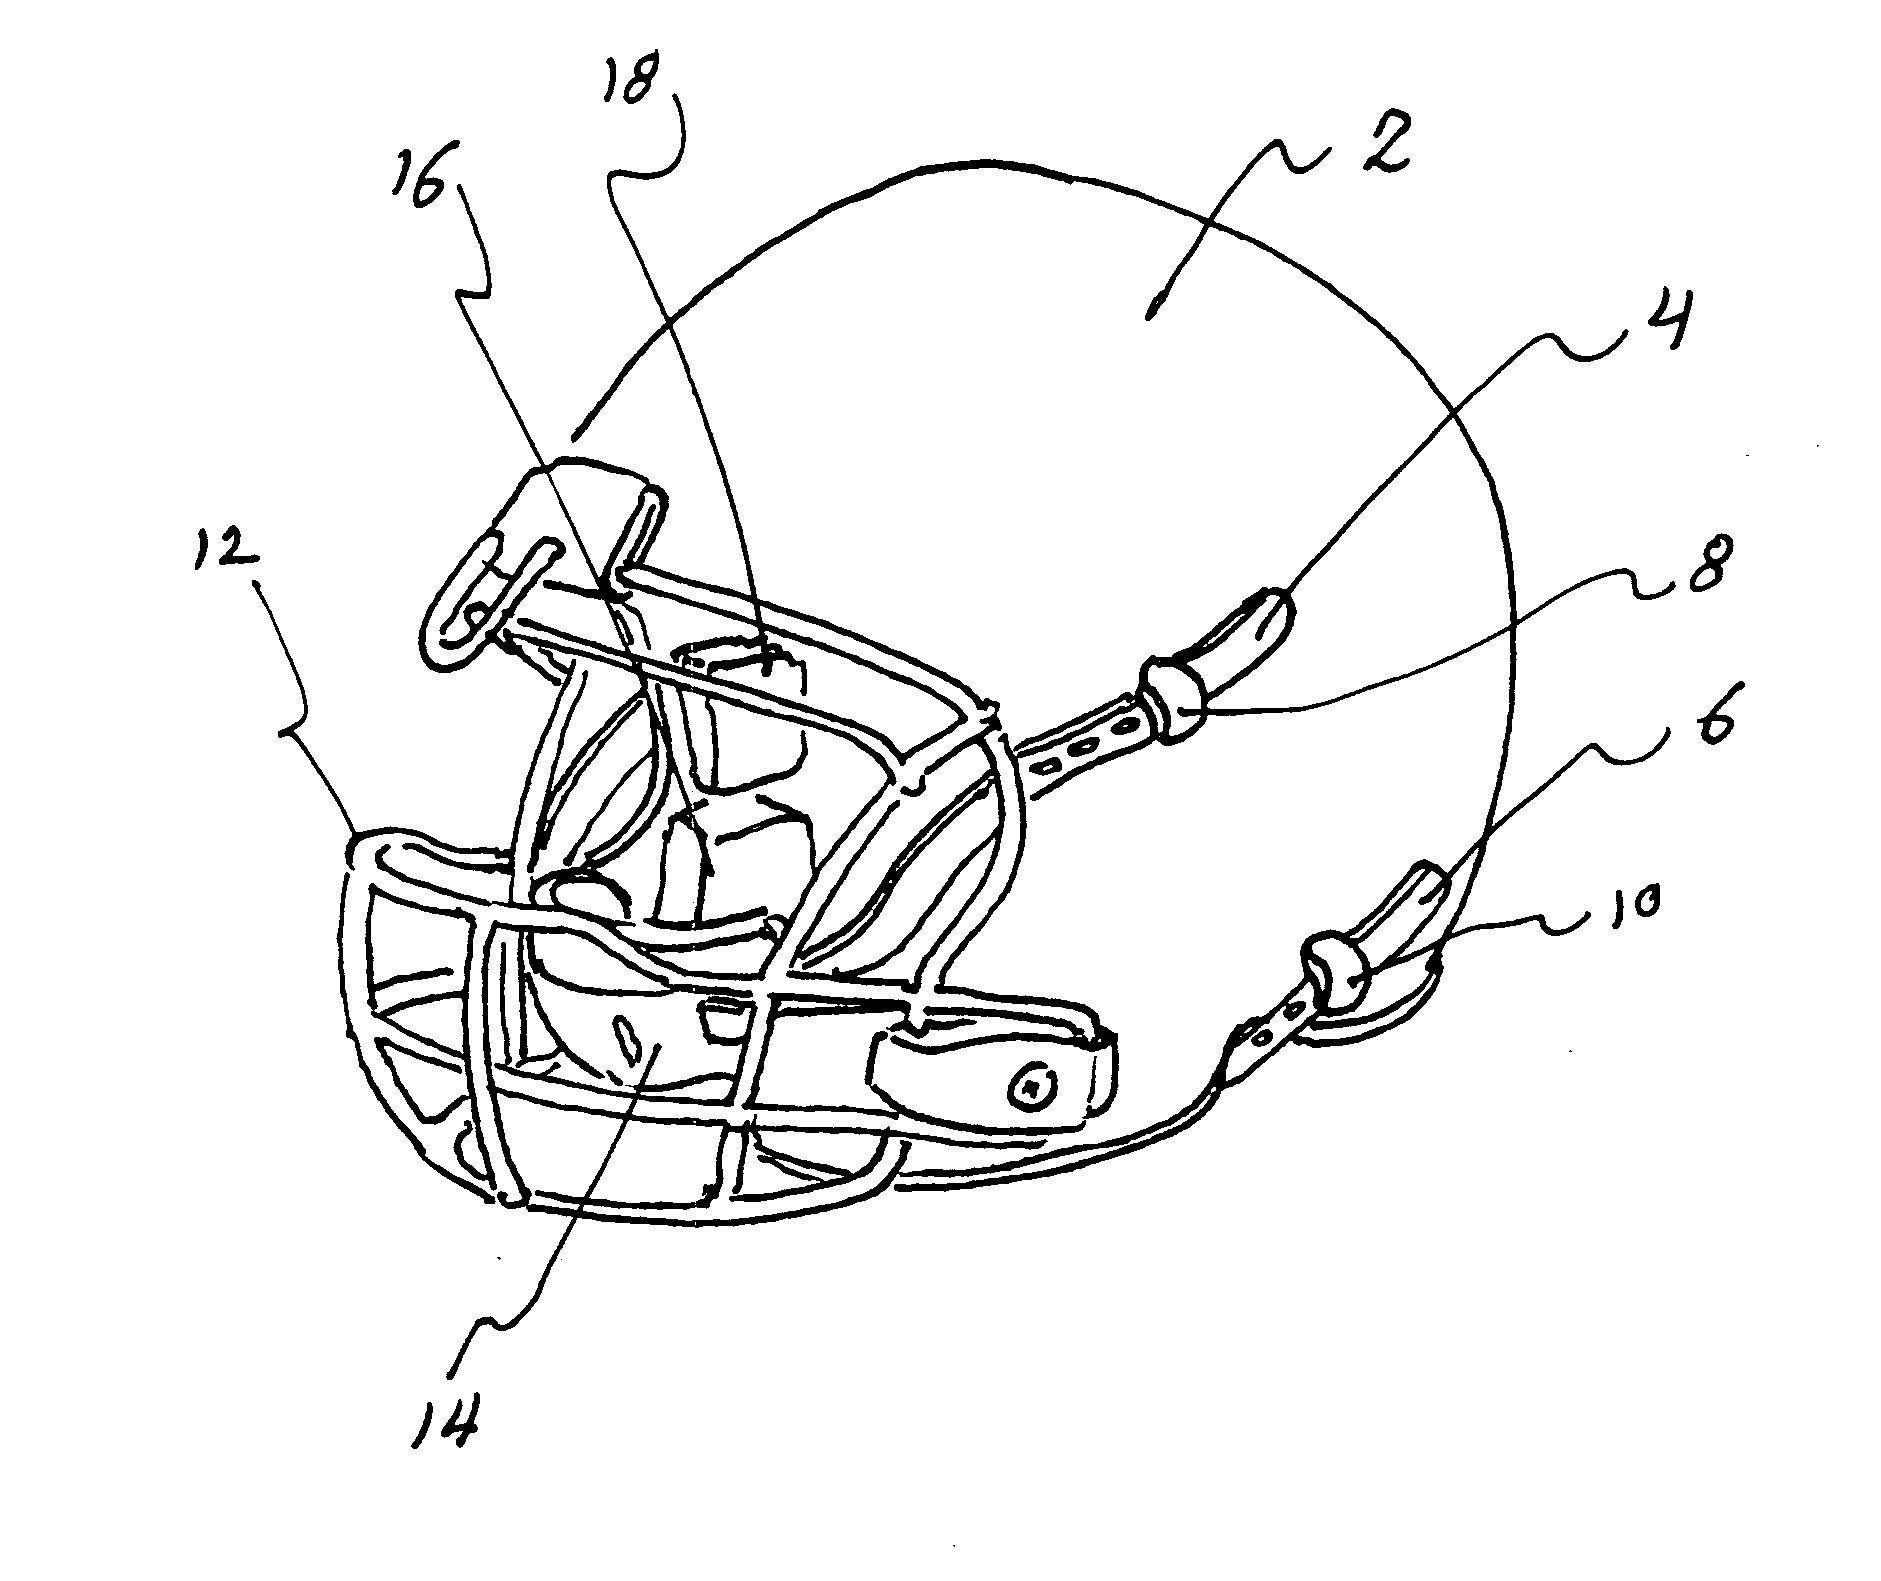 Strap attachment for a sports helmet